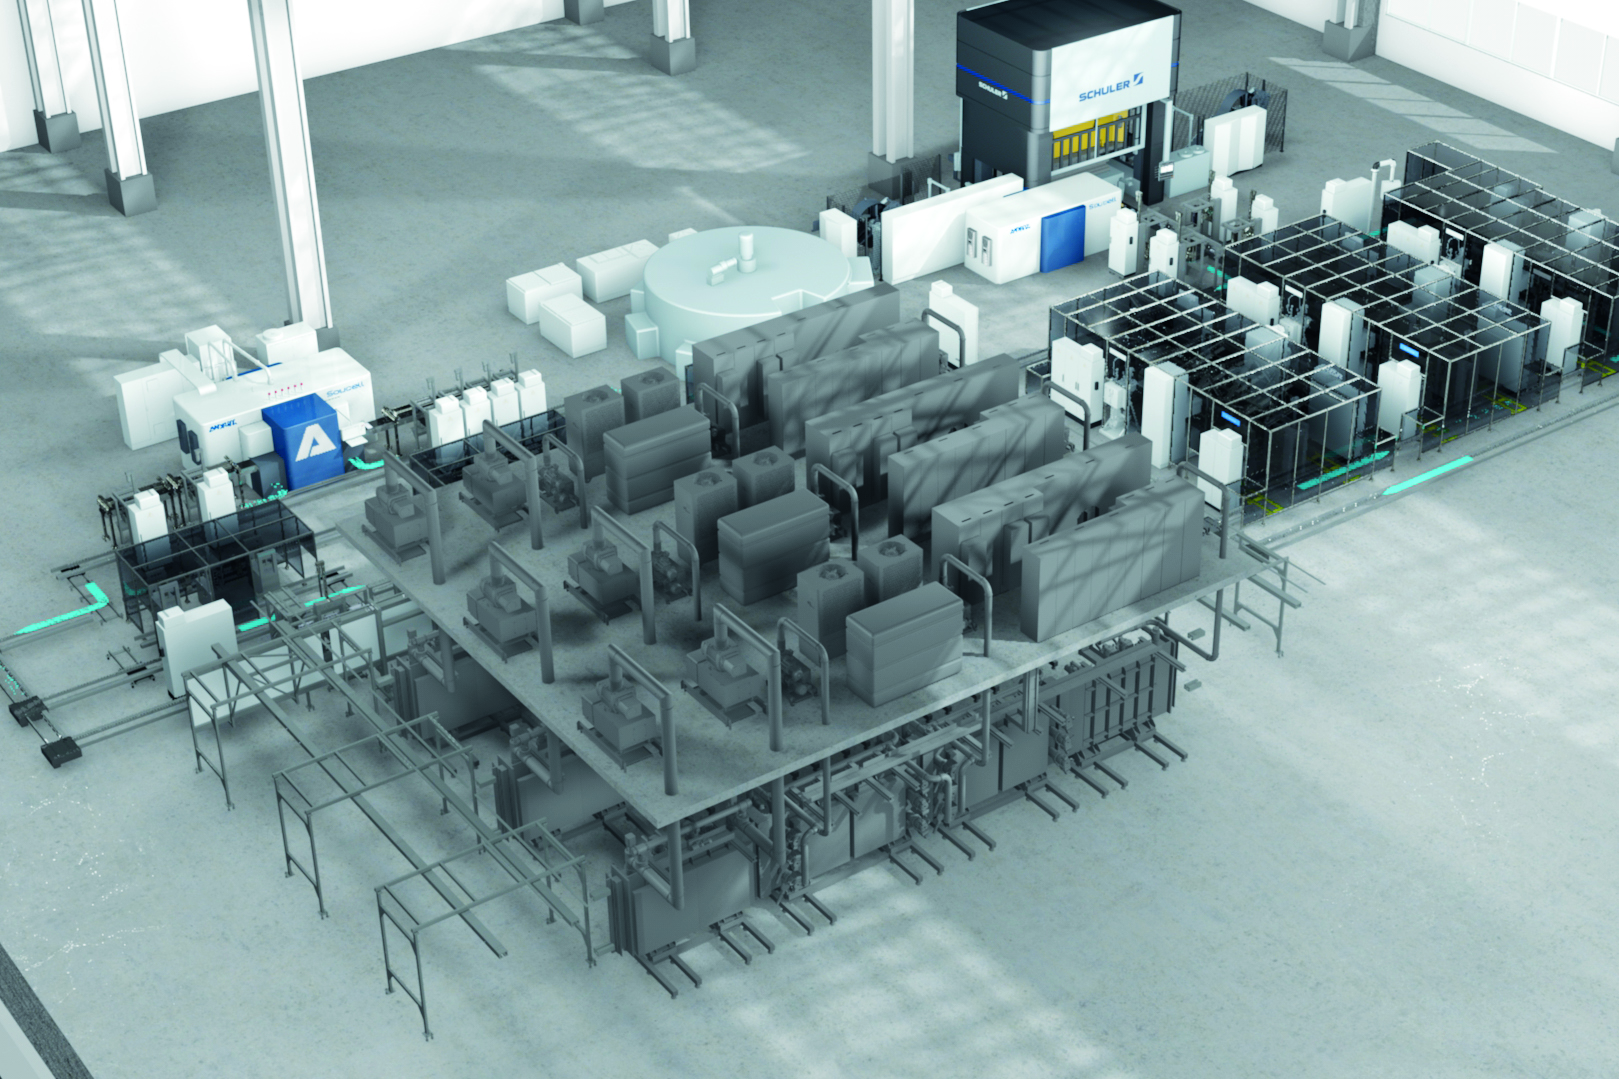 Turnkey to the stack: Schuler, Thyssenkrupp Automation Engineering, and Andritz Soutec supply the complete turnkey process chain (the picture shows the layout of a typical line) for the annual production of up to 50,000 fuel cells.  